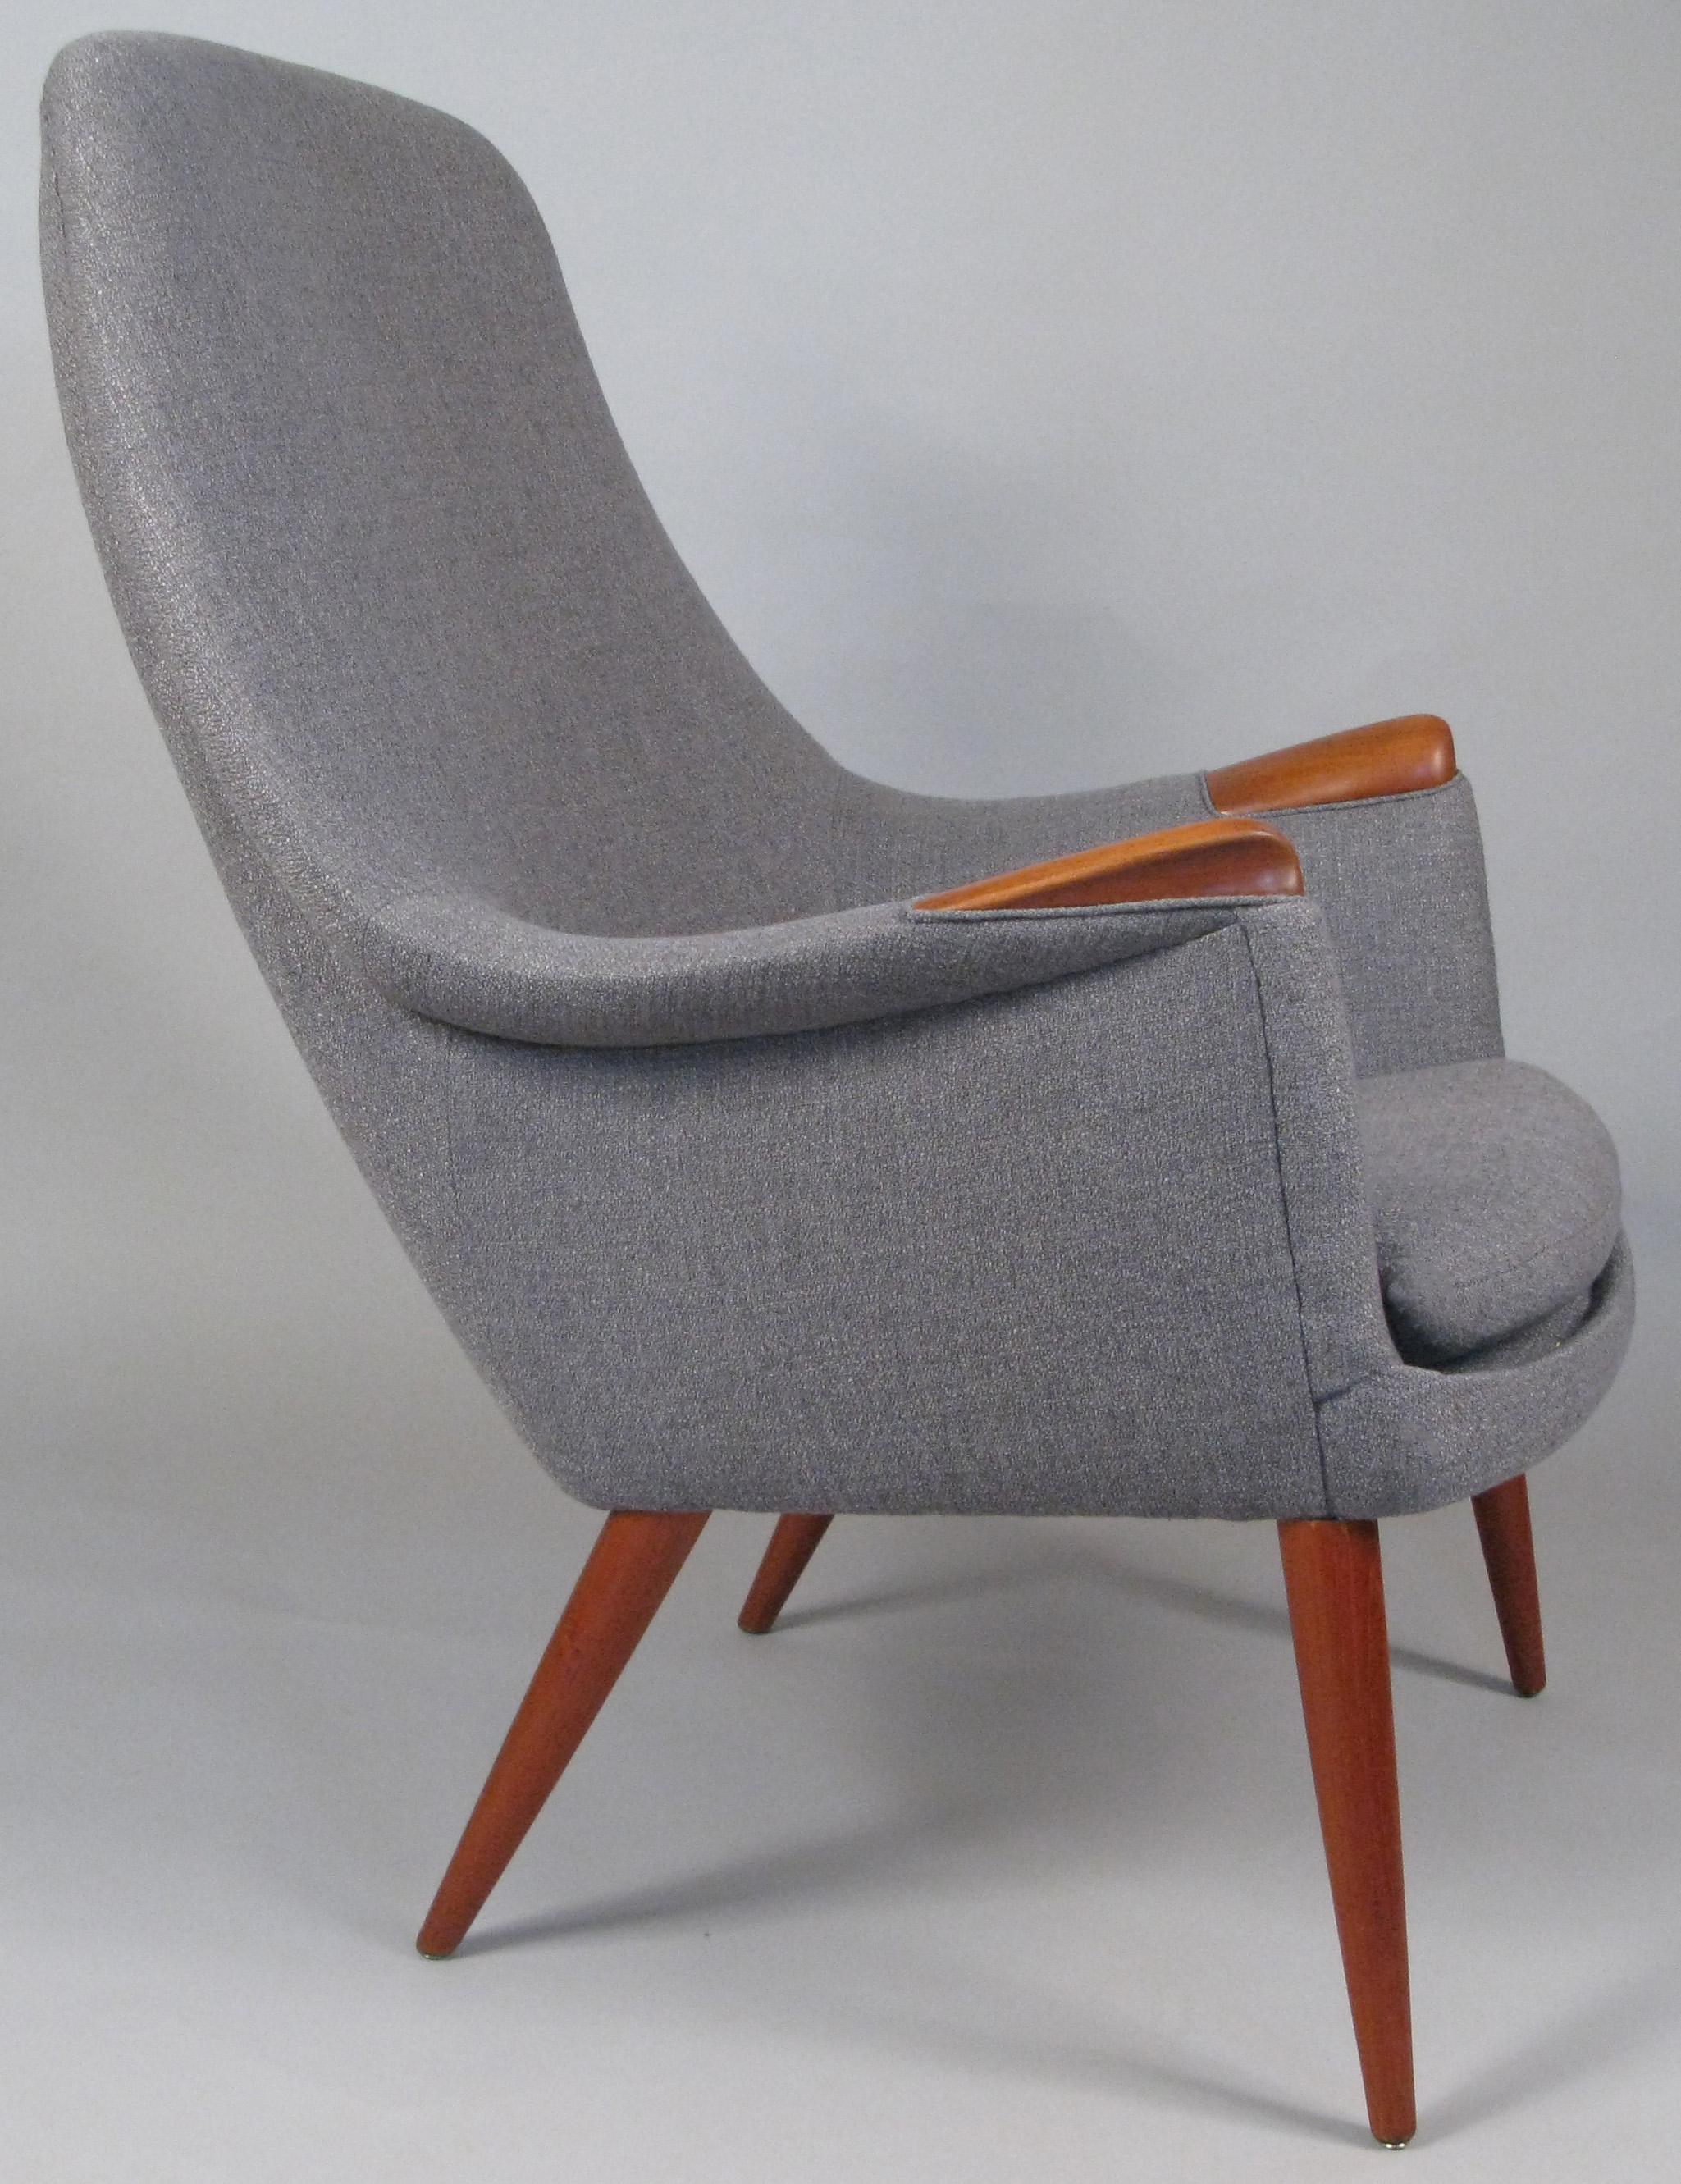 A truly stunning and beautiful 1950s high back lounge chair designed by Gerhard Berg and made by LK Hjelle, with solid teak legs and inset arms. Expertly reupholstered in a soft grey wool fabric.